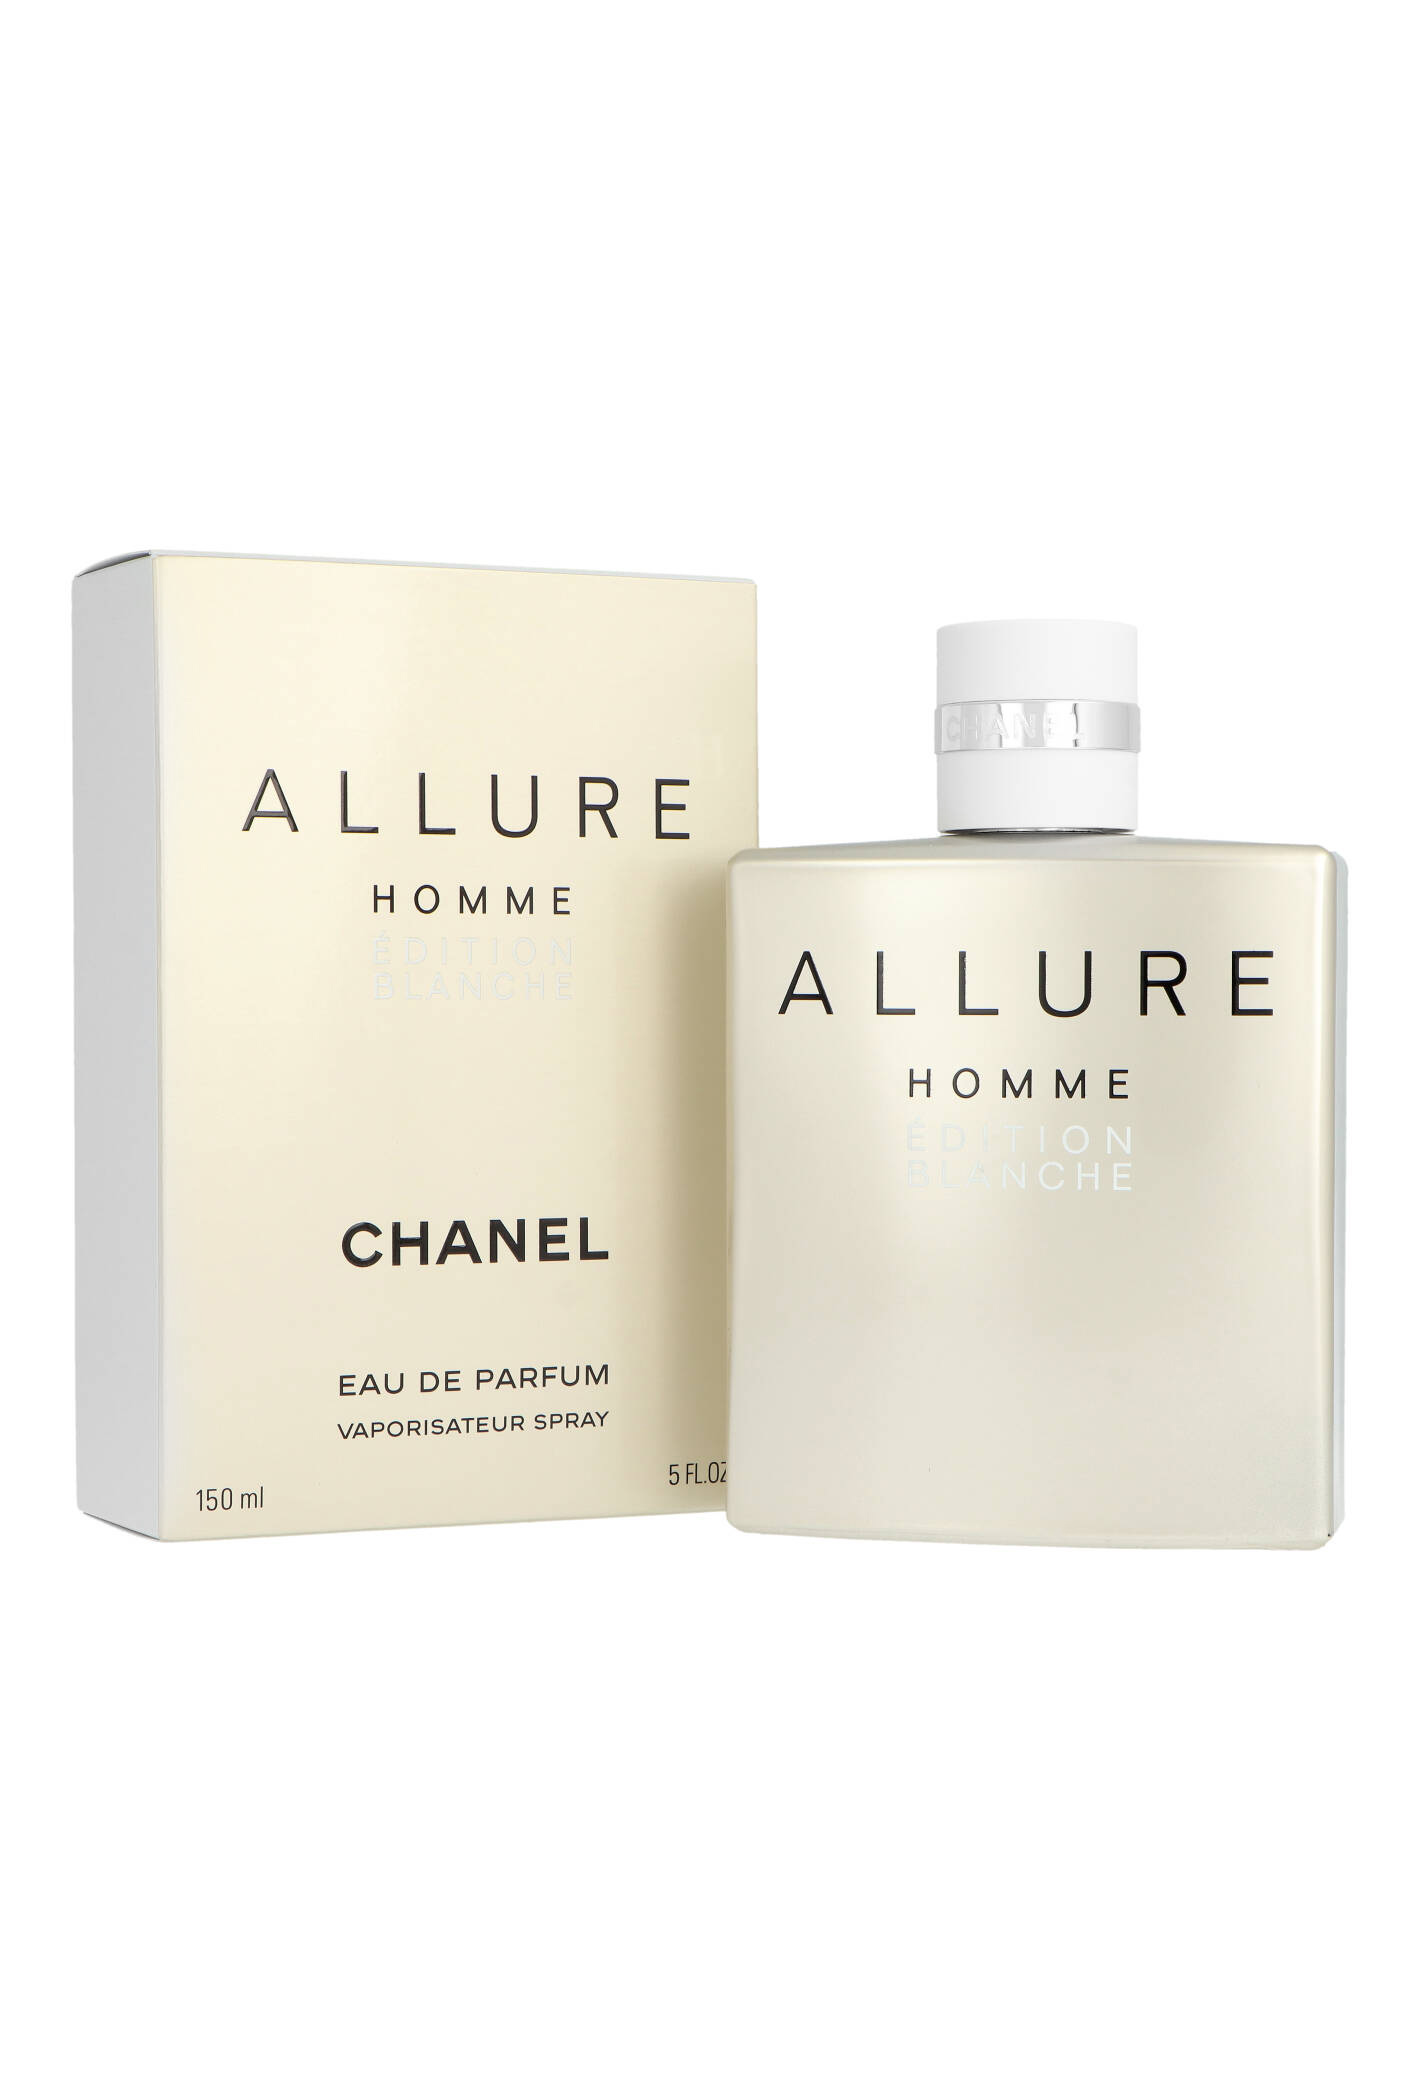 Chanel Allure Homme Edition Blanche Eau De Toilette Concentree Spray 150ml/5oz  buy in United States with free shipping CosmoStore